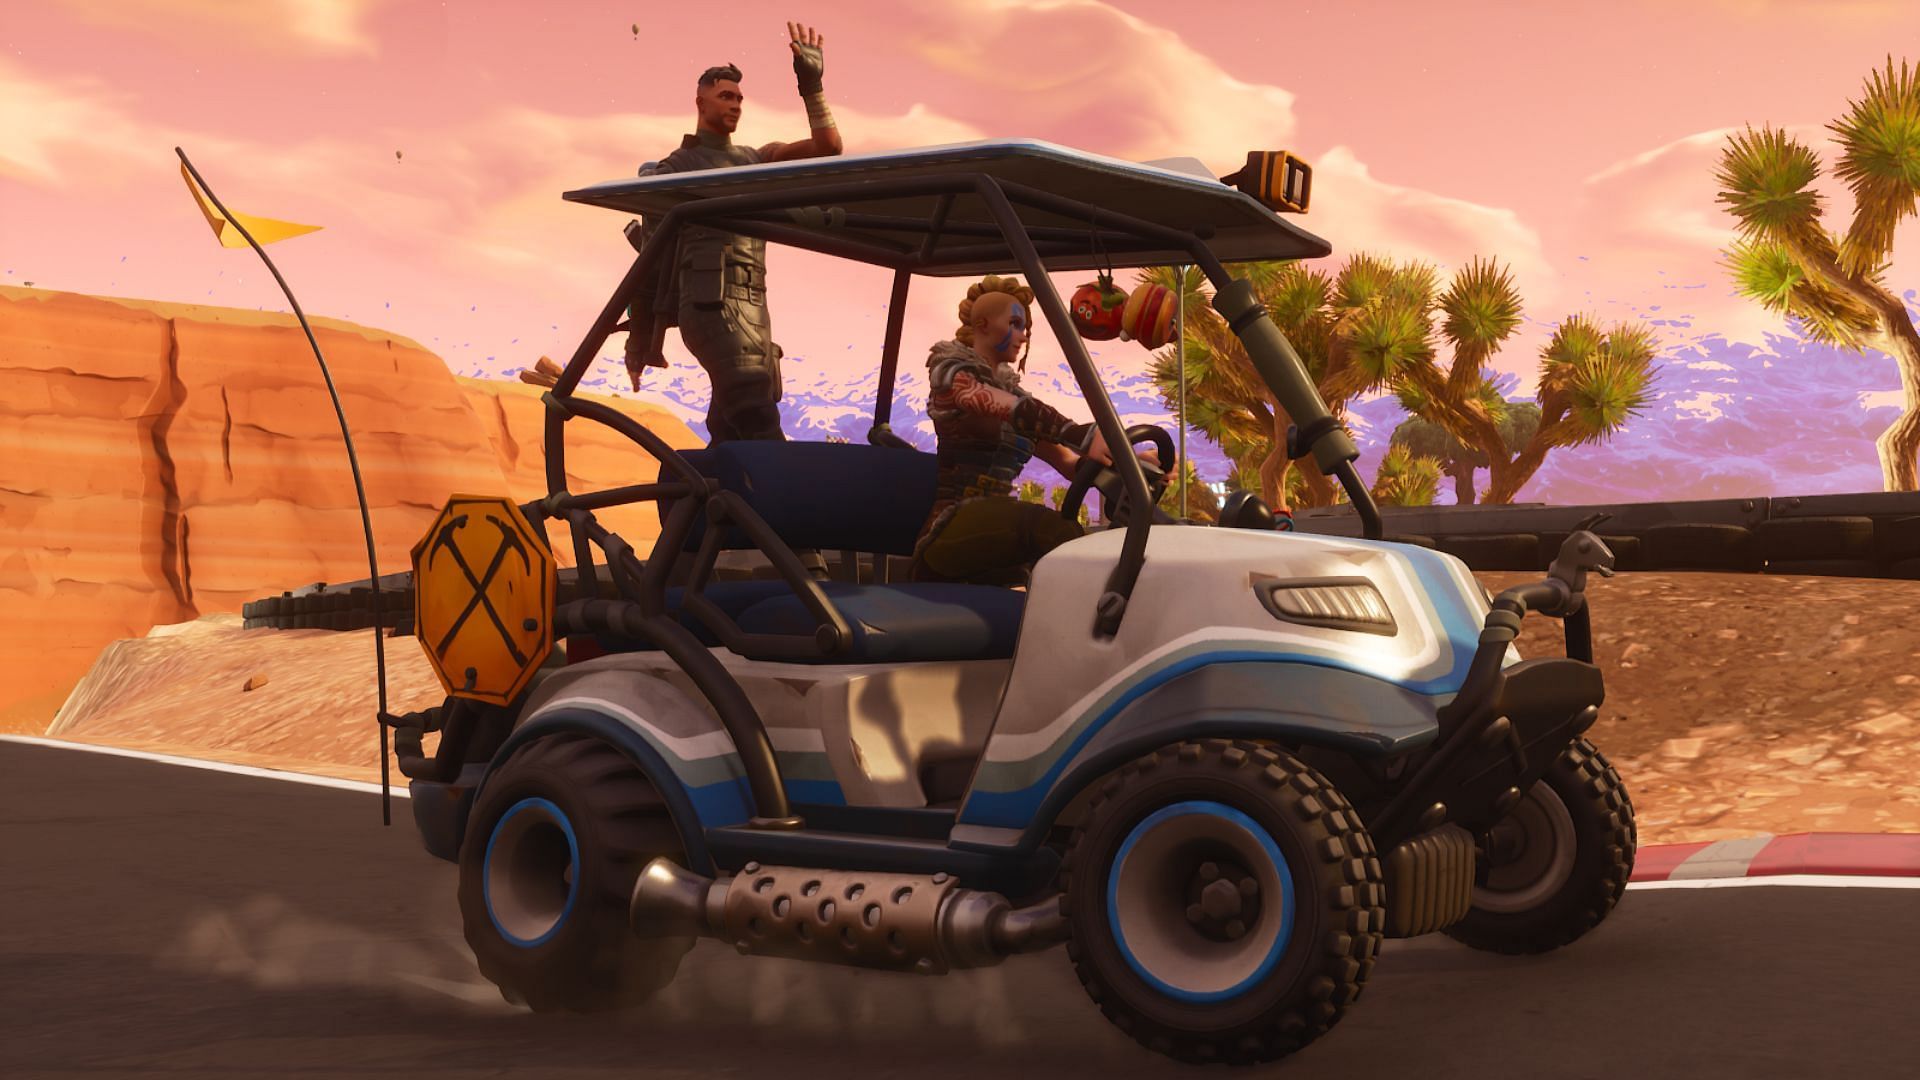 Golf carts made their Fortnite debut with Drift, who came in from a rift in Season 4. Image via Epic Games